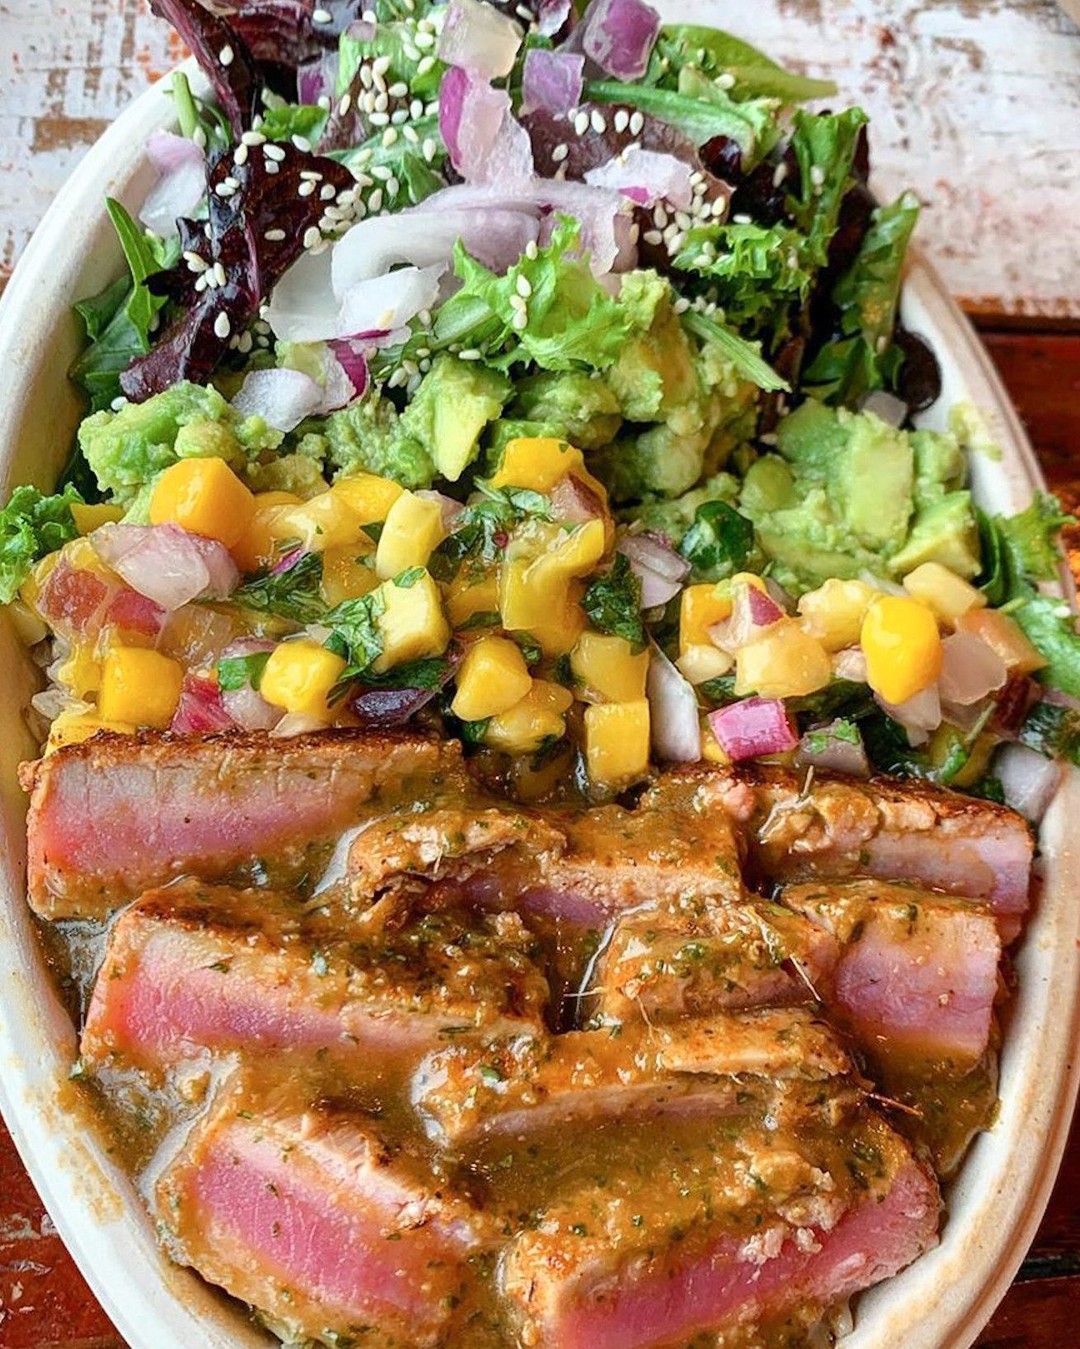 What are you eating for lunch today? 😋
Our Tuna Montezuma Bowl at AVO TACO is a must try! Made with seared ahi tuna, mango salsa, red onion, avocado, sesame seeds, and dressed with ginger soy vinaigrette. You can't go wrong with a Avo Bowl and signature cocktail for a mid-week pick me up. 🥑🌮❤

 #longislandny #longisland #longislandfoodies #longislandfoodie #lifoodie #newhydepark #newhydeparkny #longislandrestaurants #lifoodfinds #tacos #bowls #tunabowl #newyorkfood #newyorkfoodie